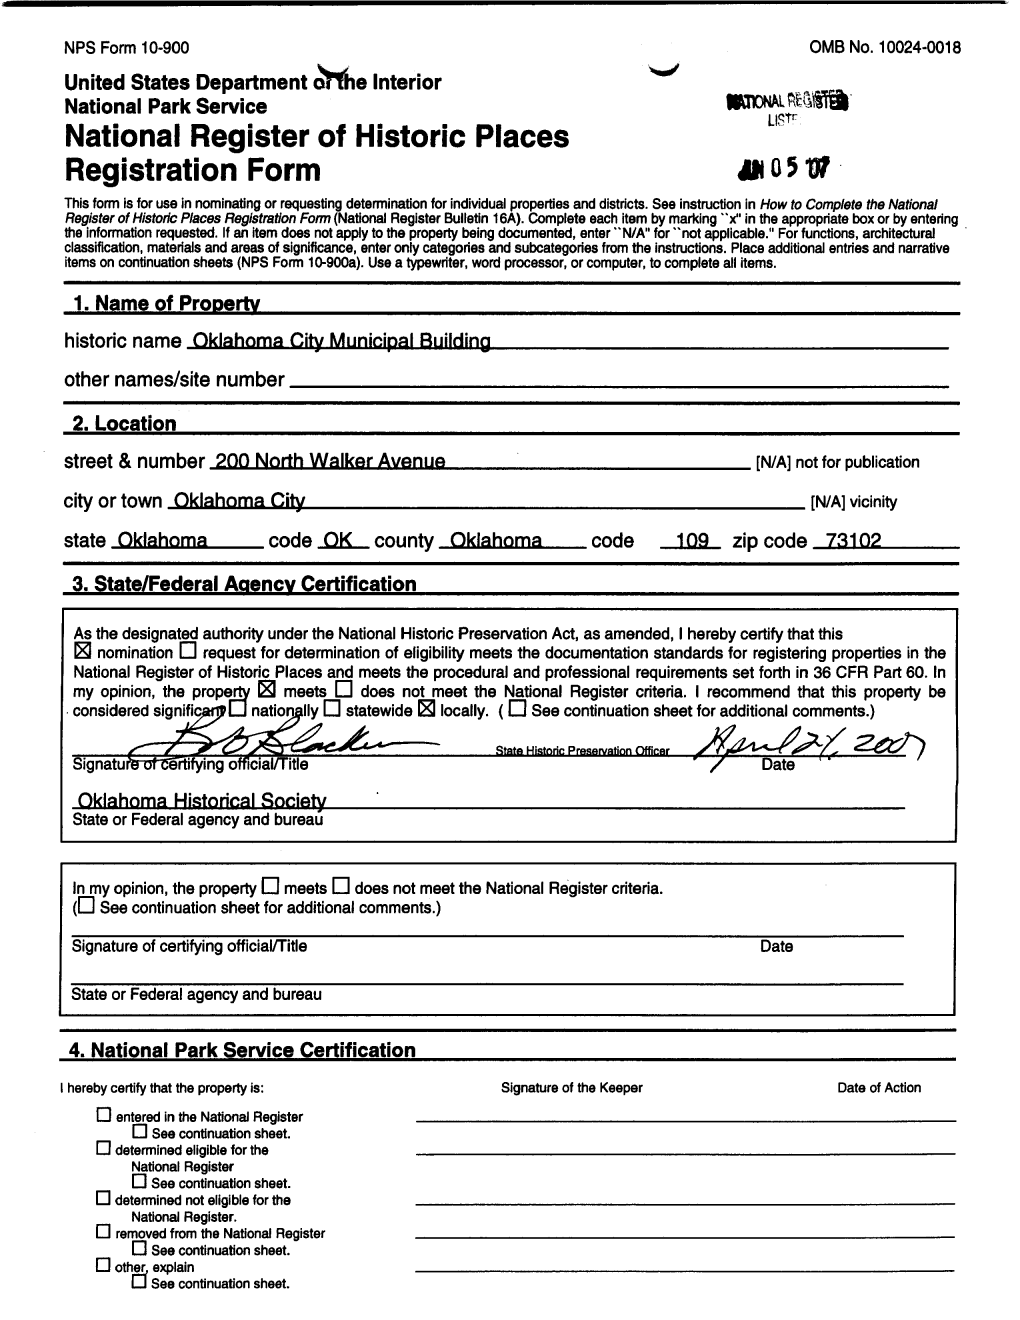 National Register of Historic Places Registration Form This Fonn Is for Use in Nominating Or Requesting Detennination for Individual Properties and Districts